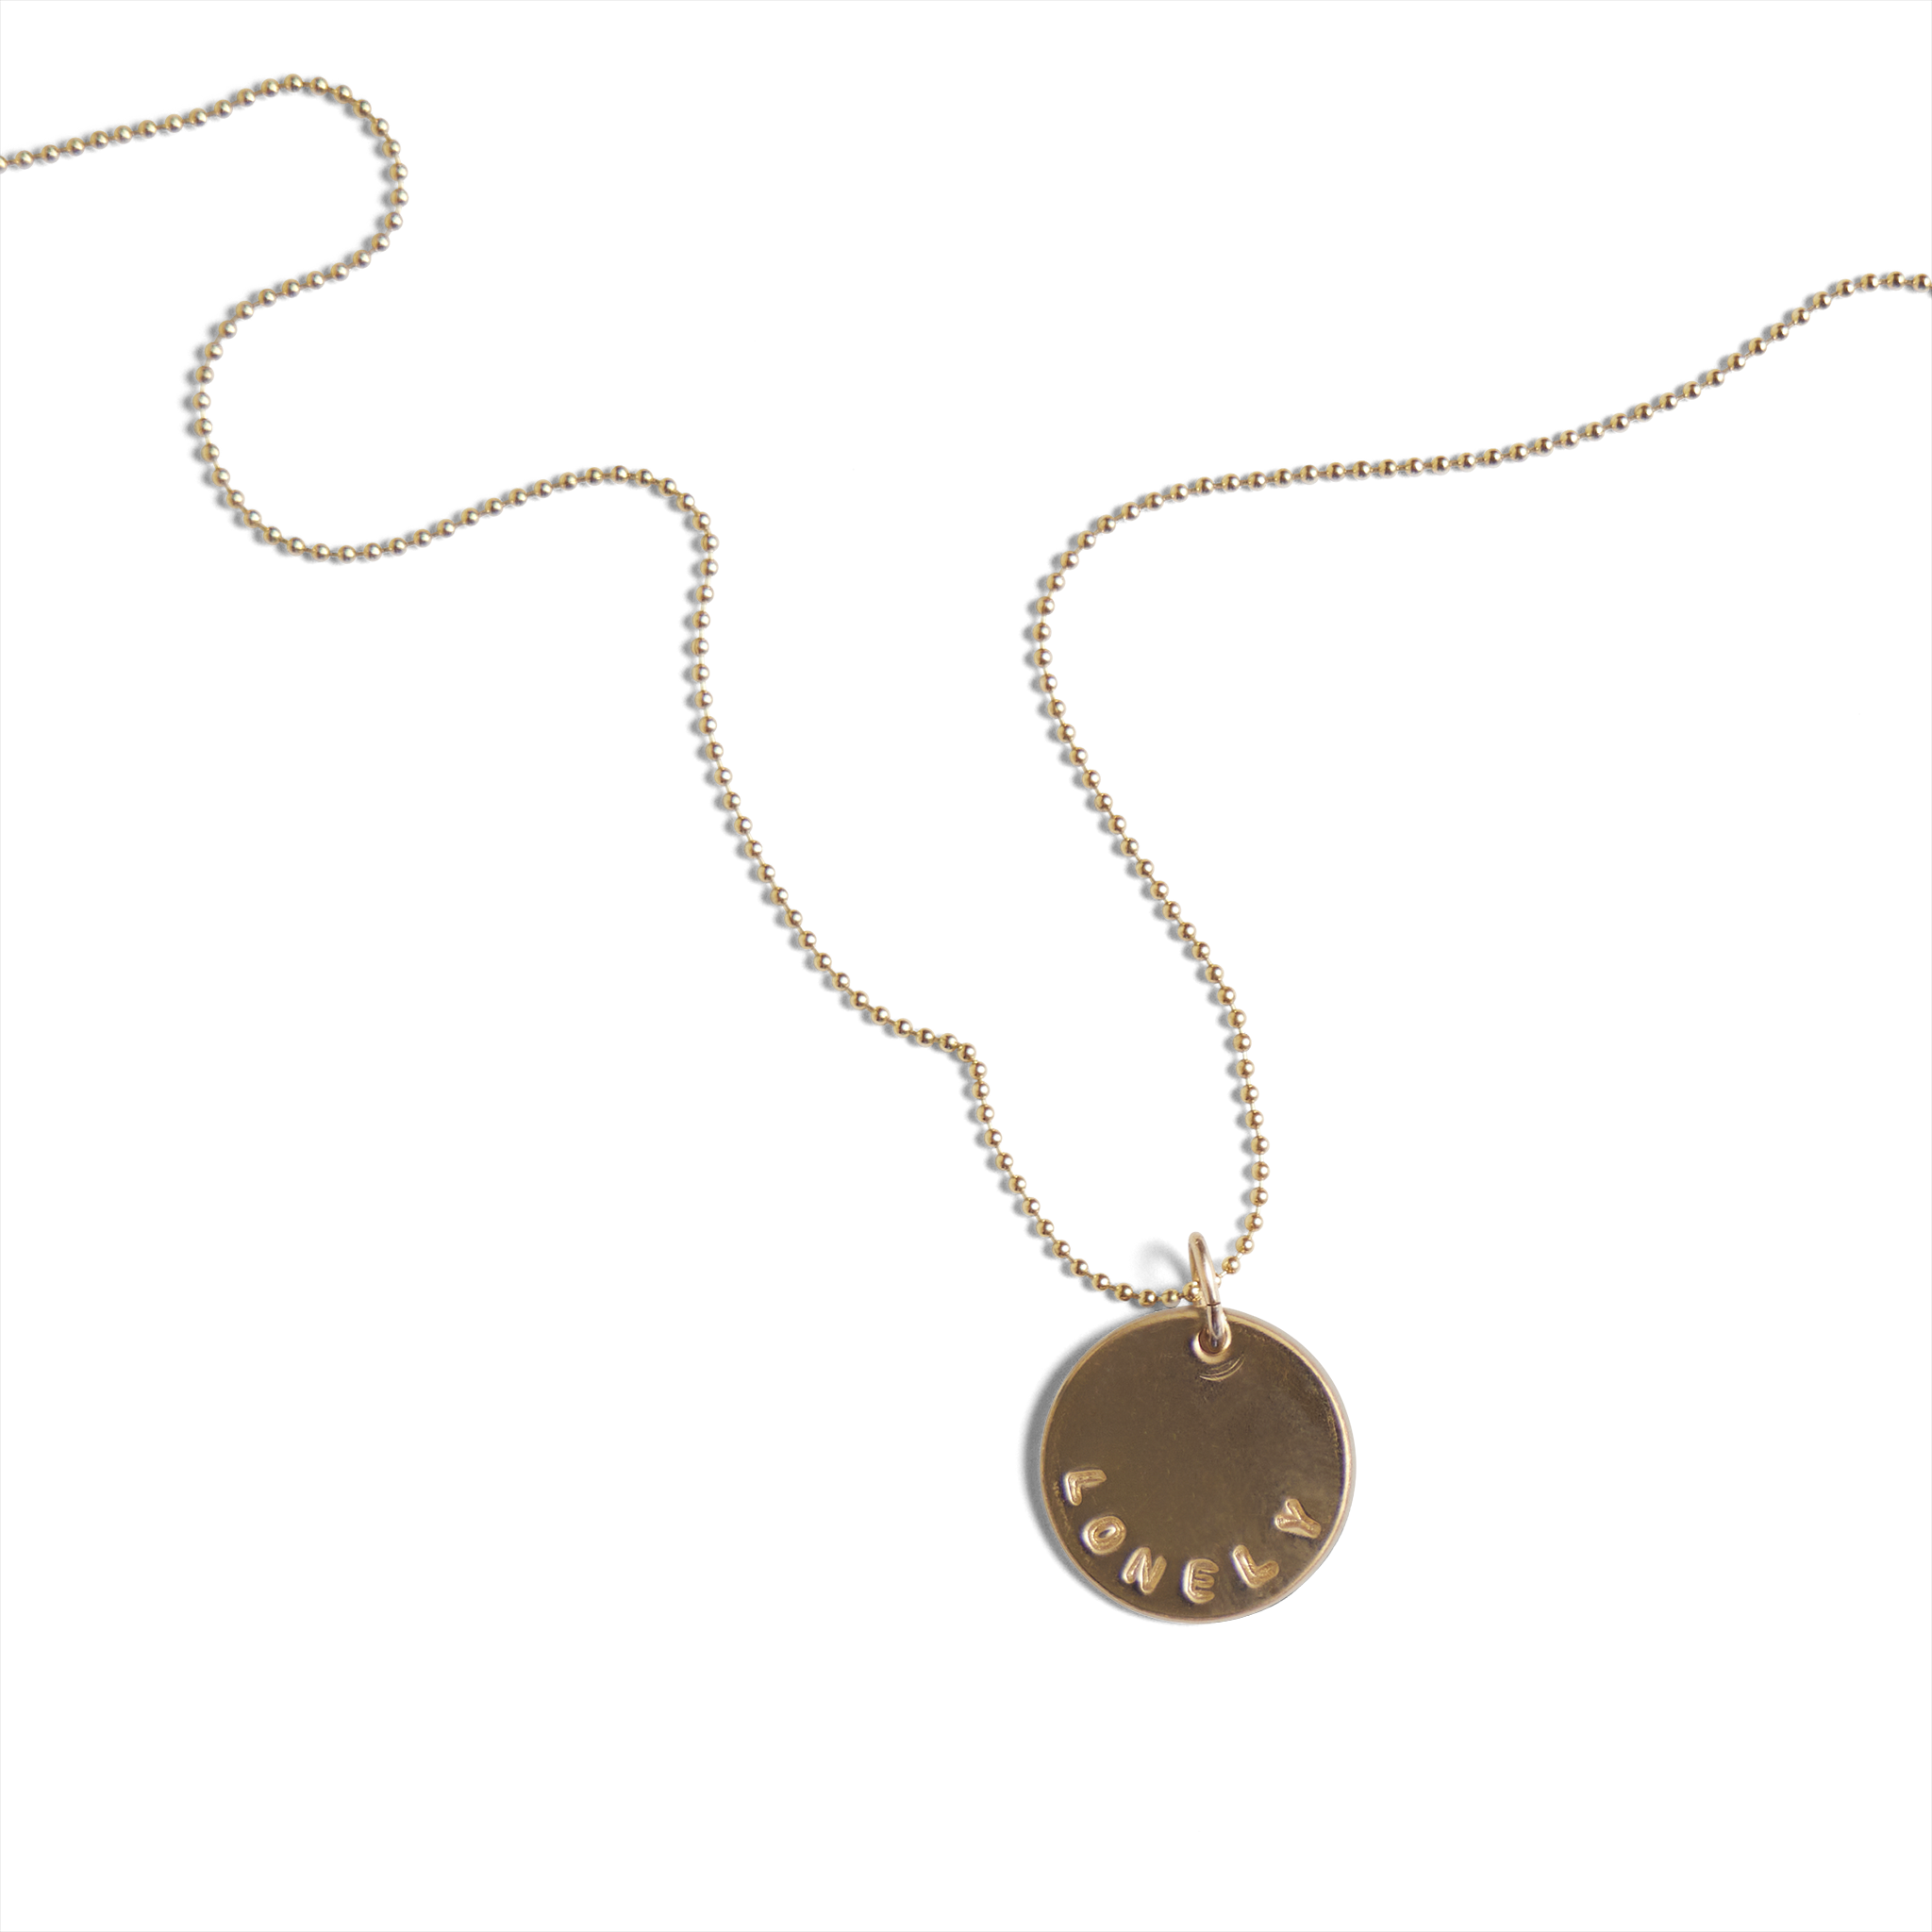 Script Initial Disc Necklace 10K Yellow Gold 18